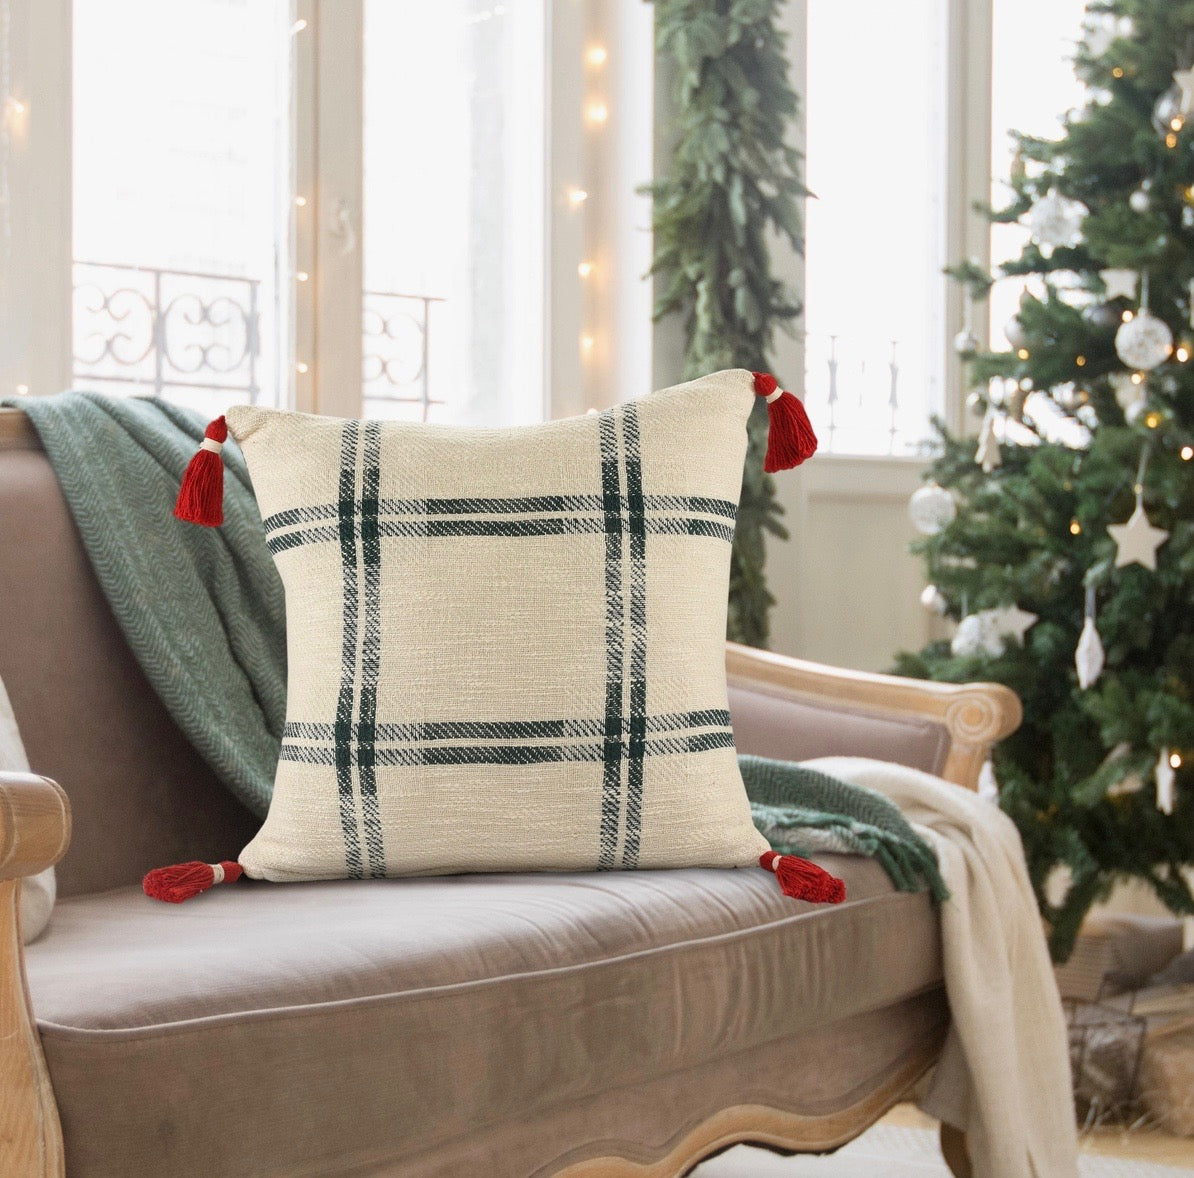 Pillow - Woven Holiday Plaid Throw Pillow